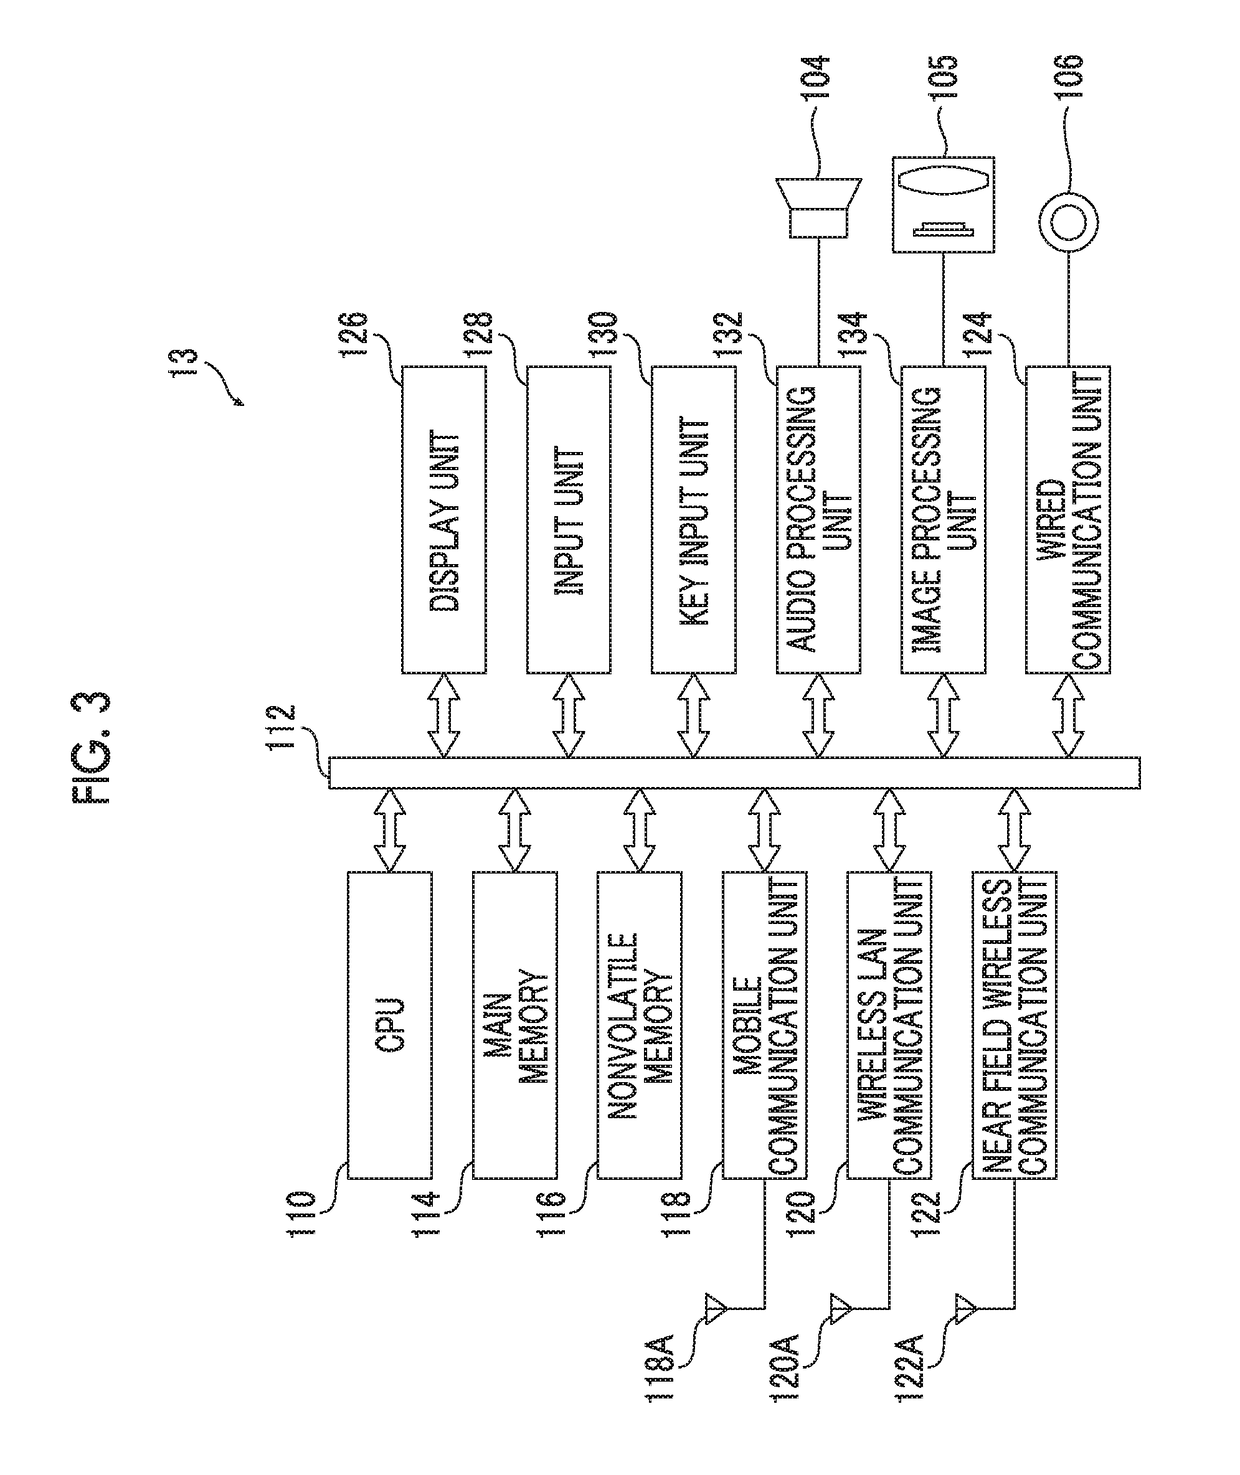 Product design assistance device and product design assistance method